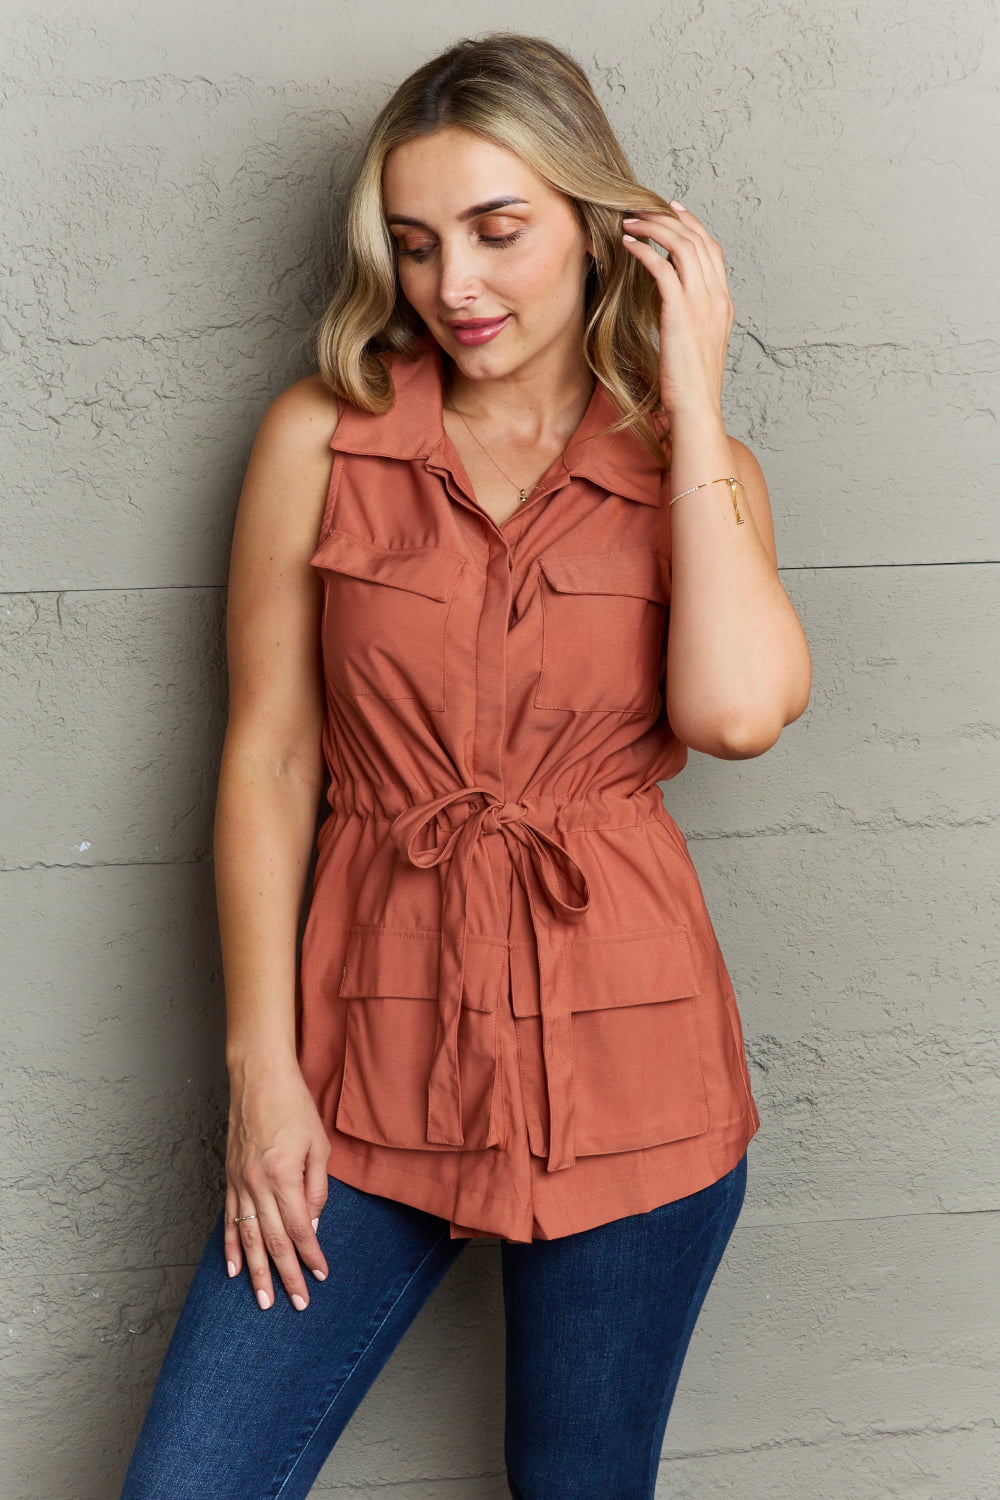 Brick Red Sleeveless Collared Button Down Top